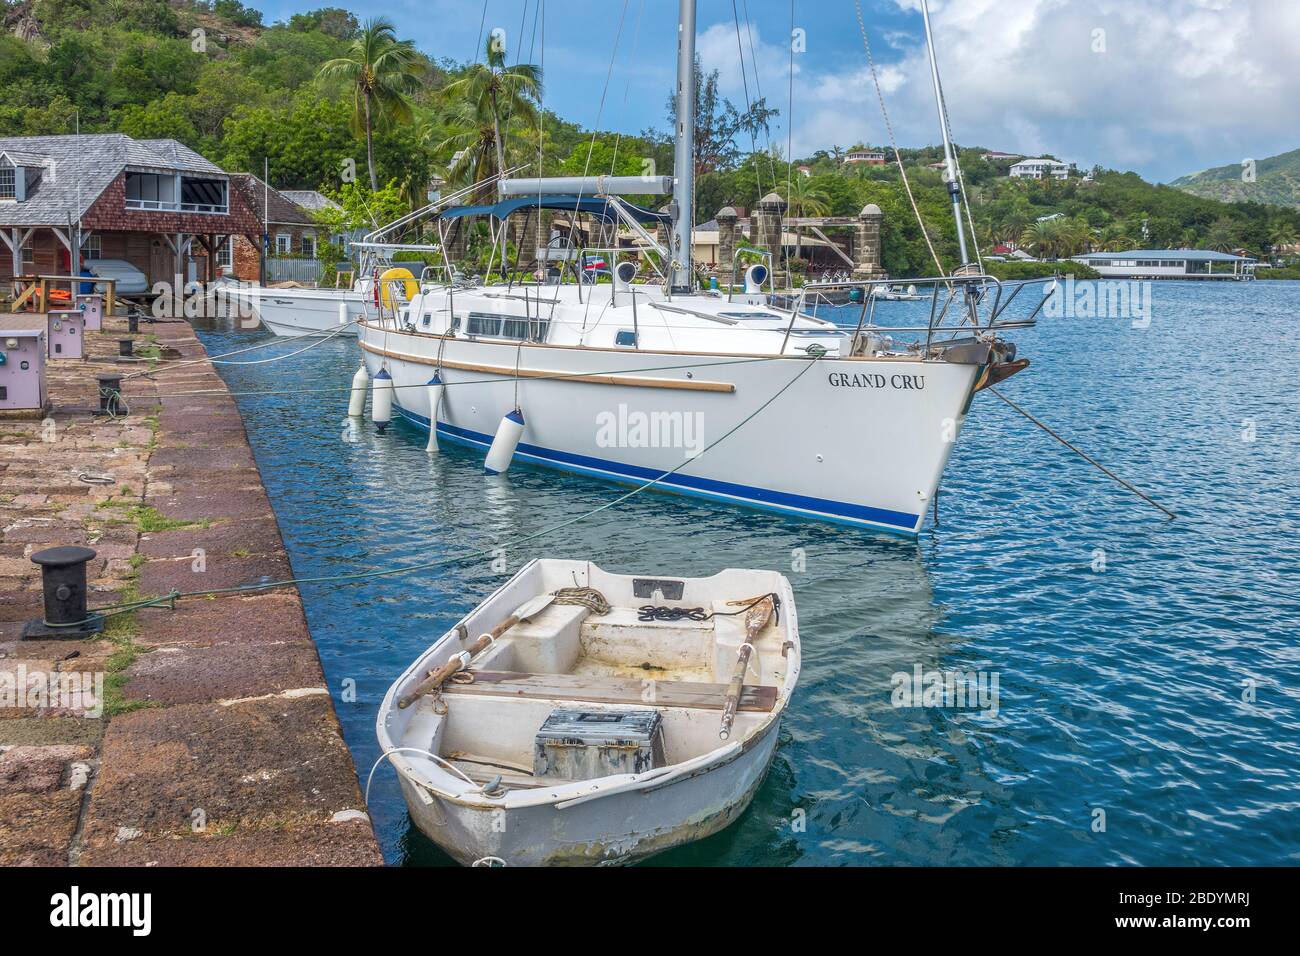 Boats In The harbour, Nelsons Dockyard, Antigua West Indies Stock Photo